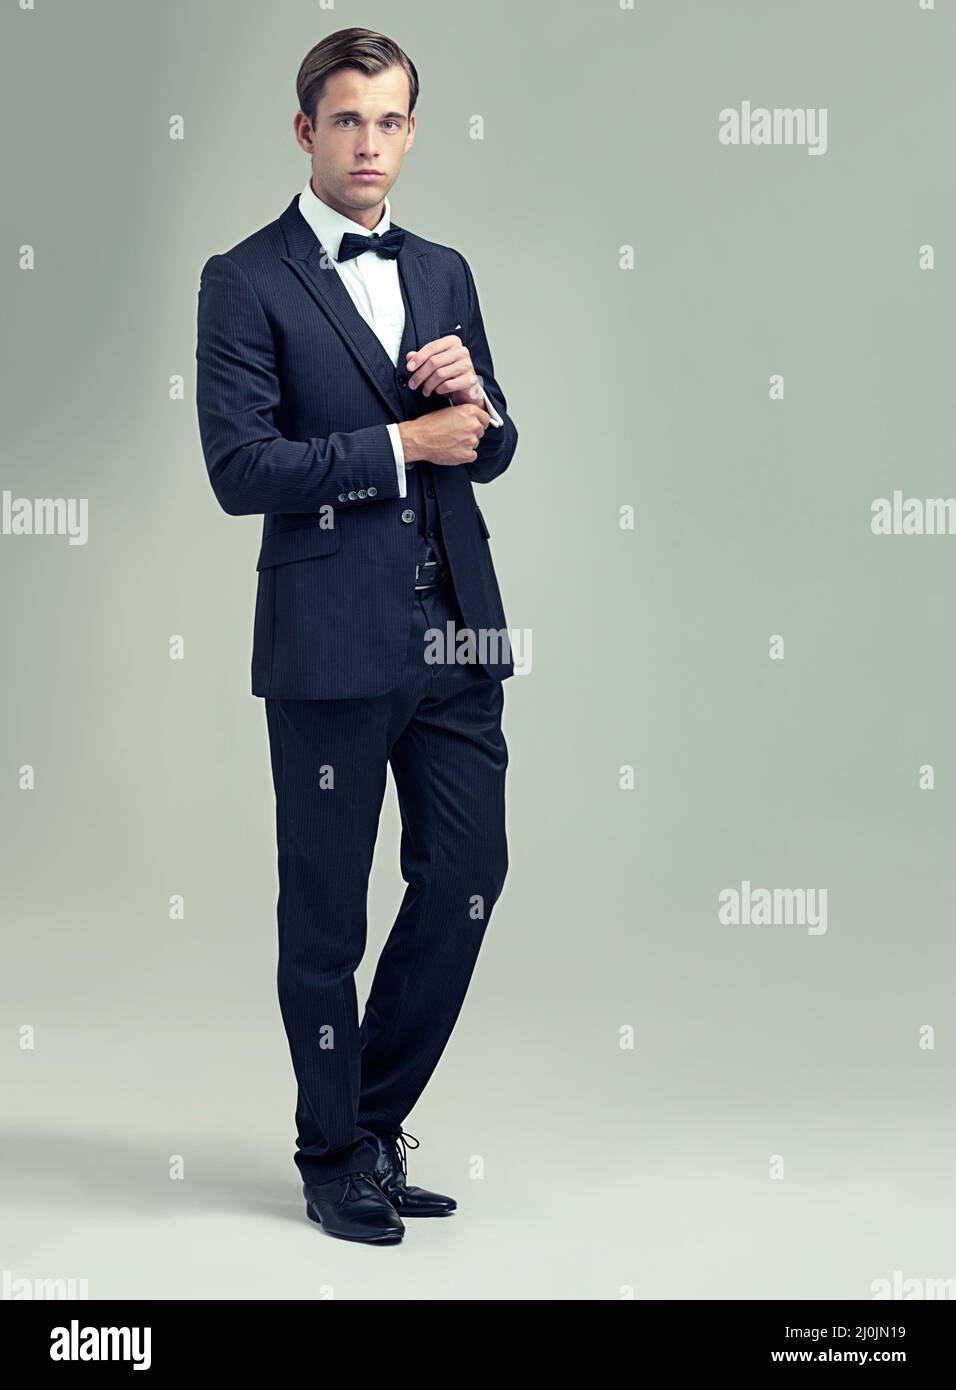 Confident and classic. A full length studio shot of a handsome young man in a stylish vintage suit. Stock Photo